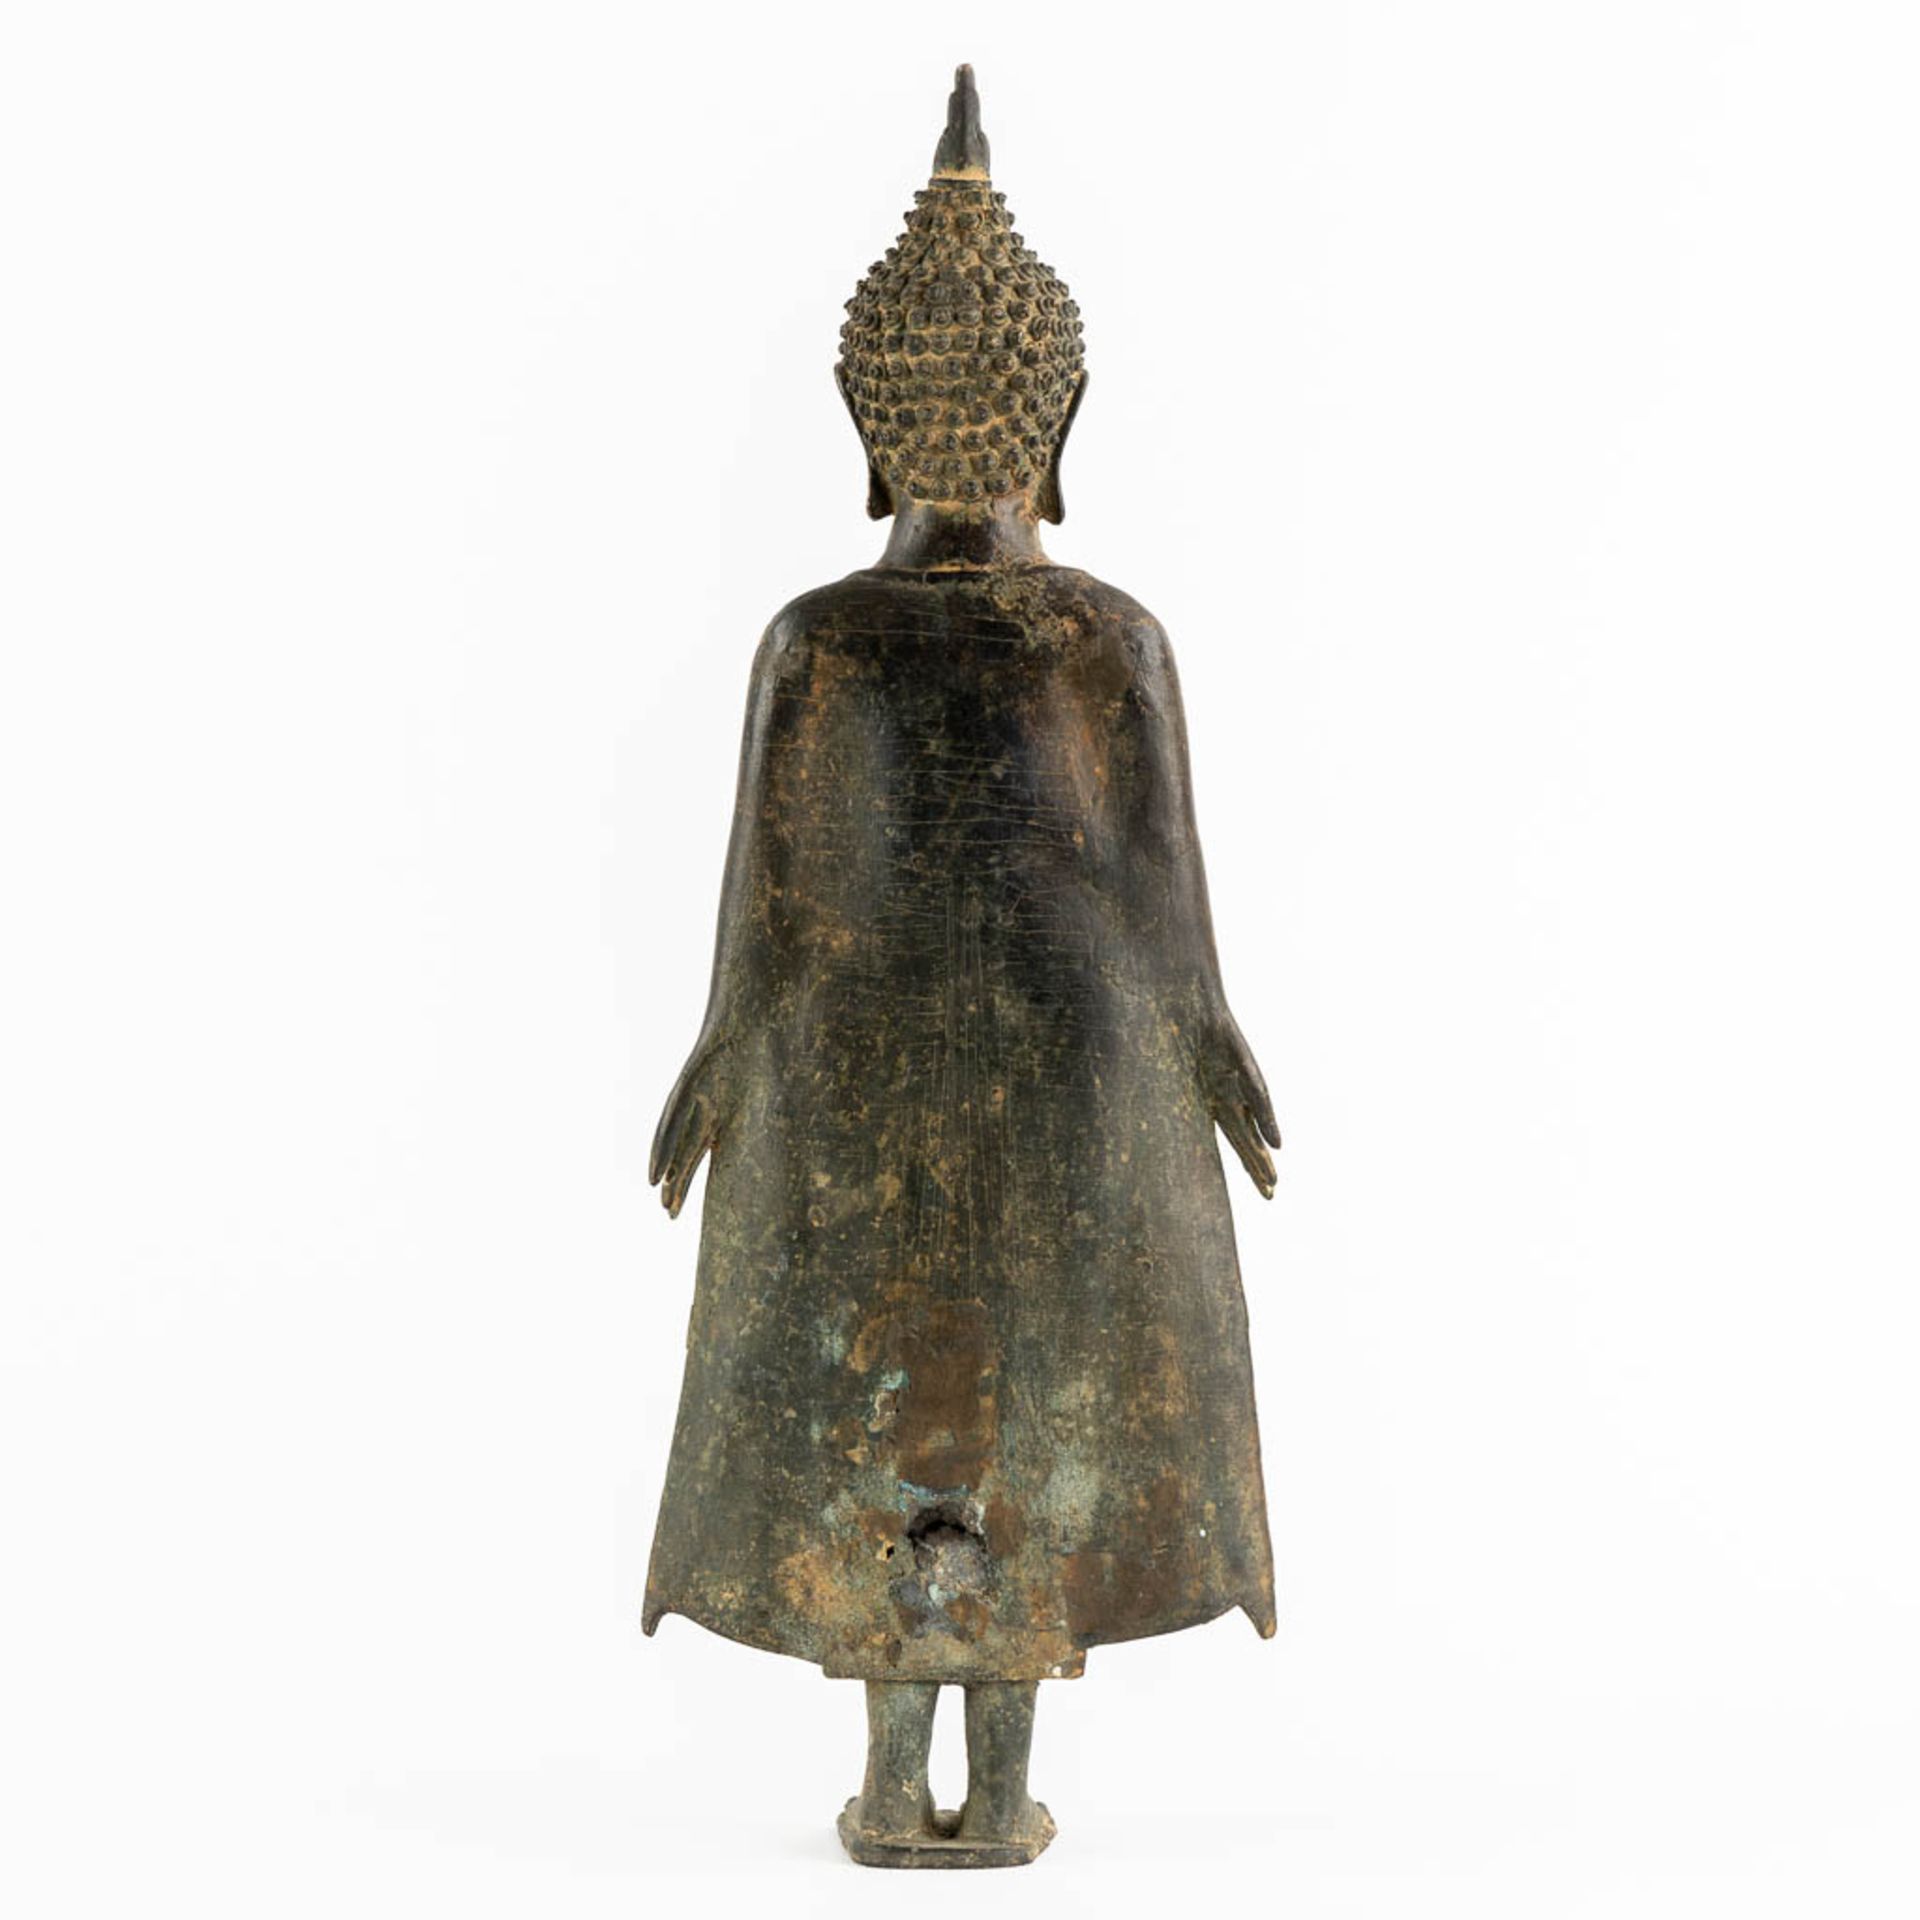 A Thai figurine of a standing Buddha, Patinated bronze. (W:16 x H:44 cm) - Image 5 of 10